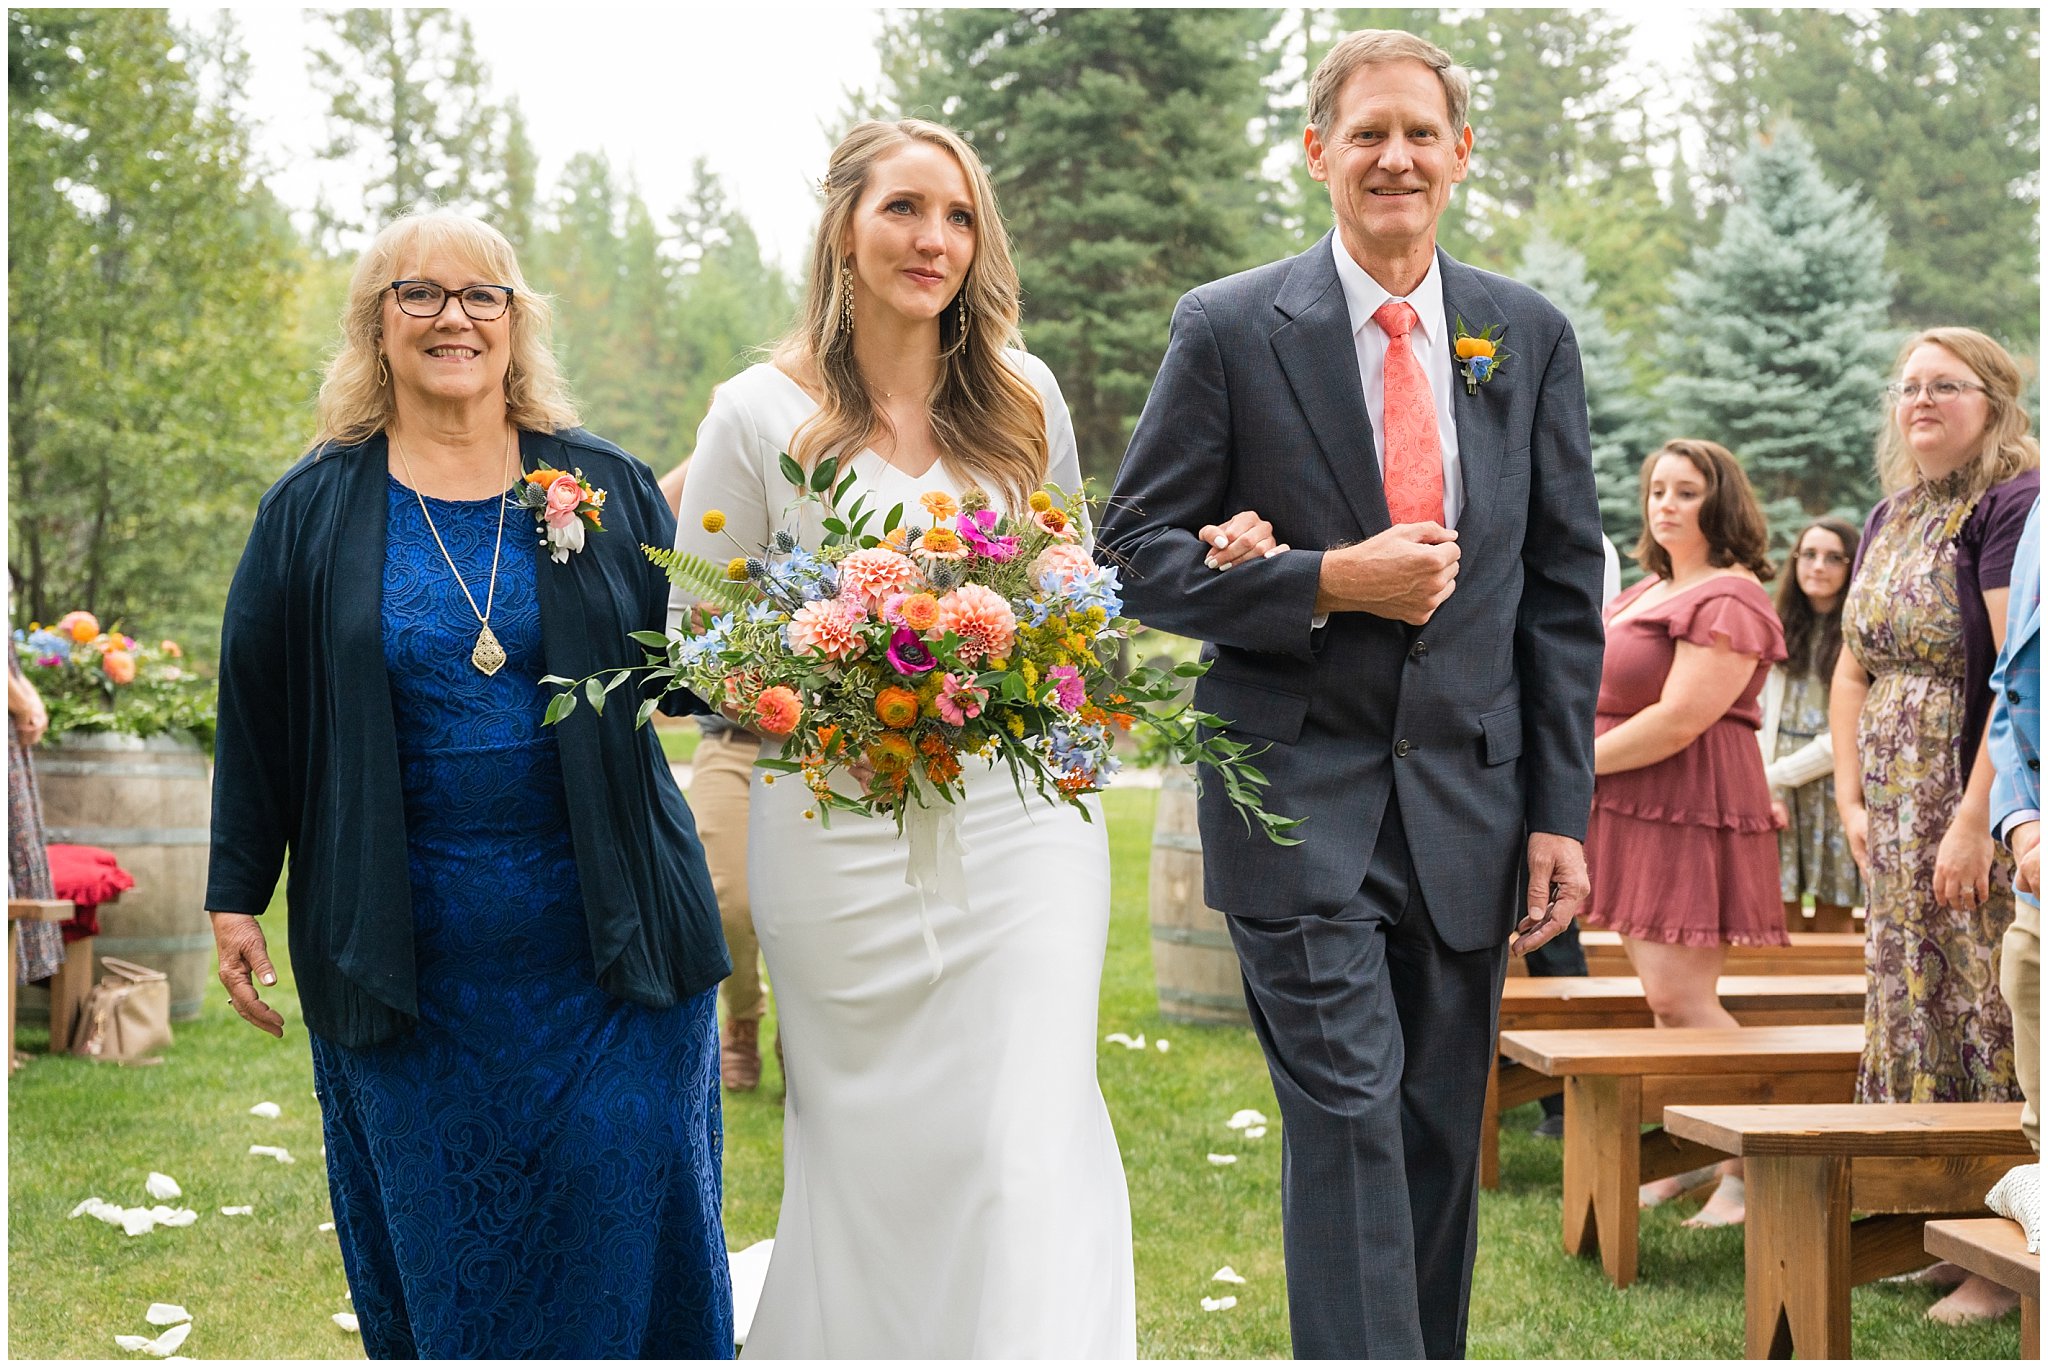 Emotional wedding ceremony in the forest of Montana forest | Mountainside Weddings Kalispell Montana Destination Wedding | Jessie and Dallin Photography